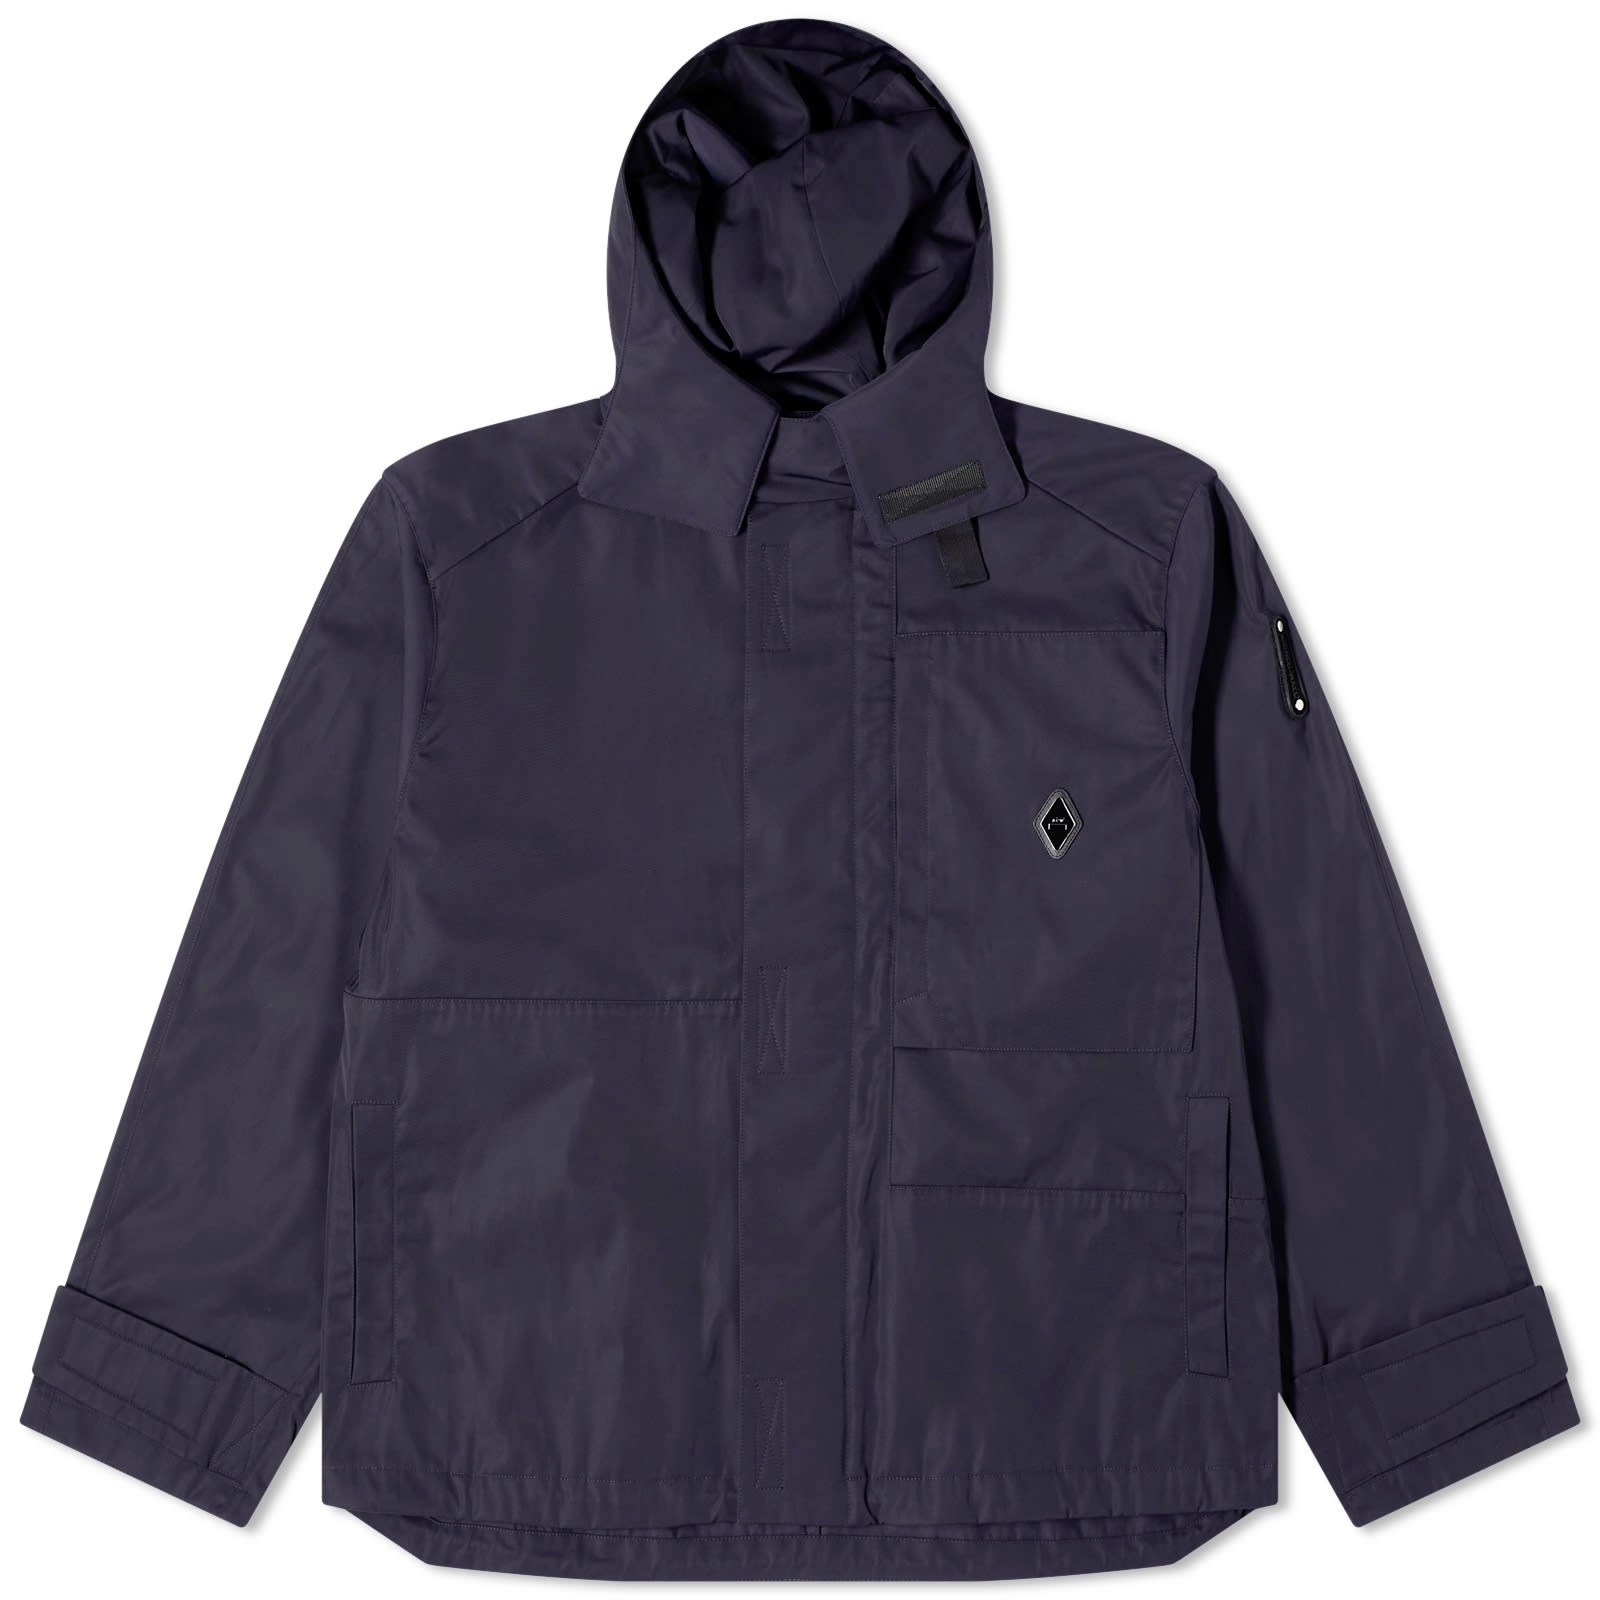 A-COLD-WALL* Gable Storm Jacket - 1